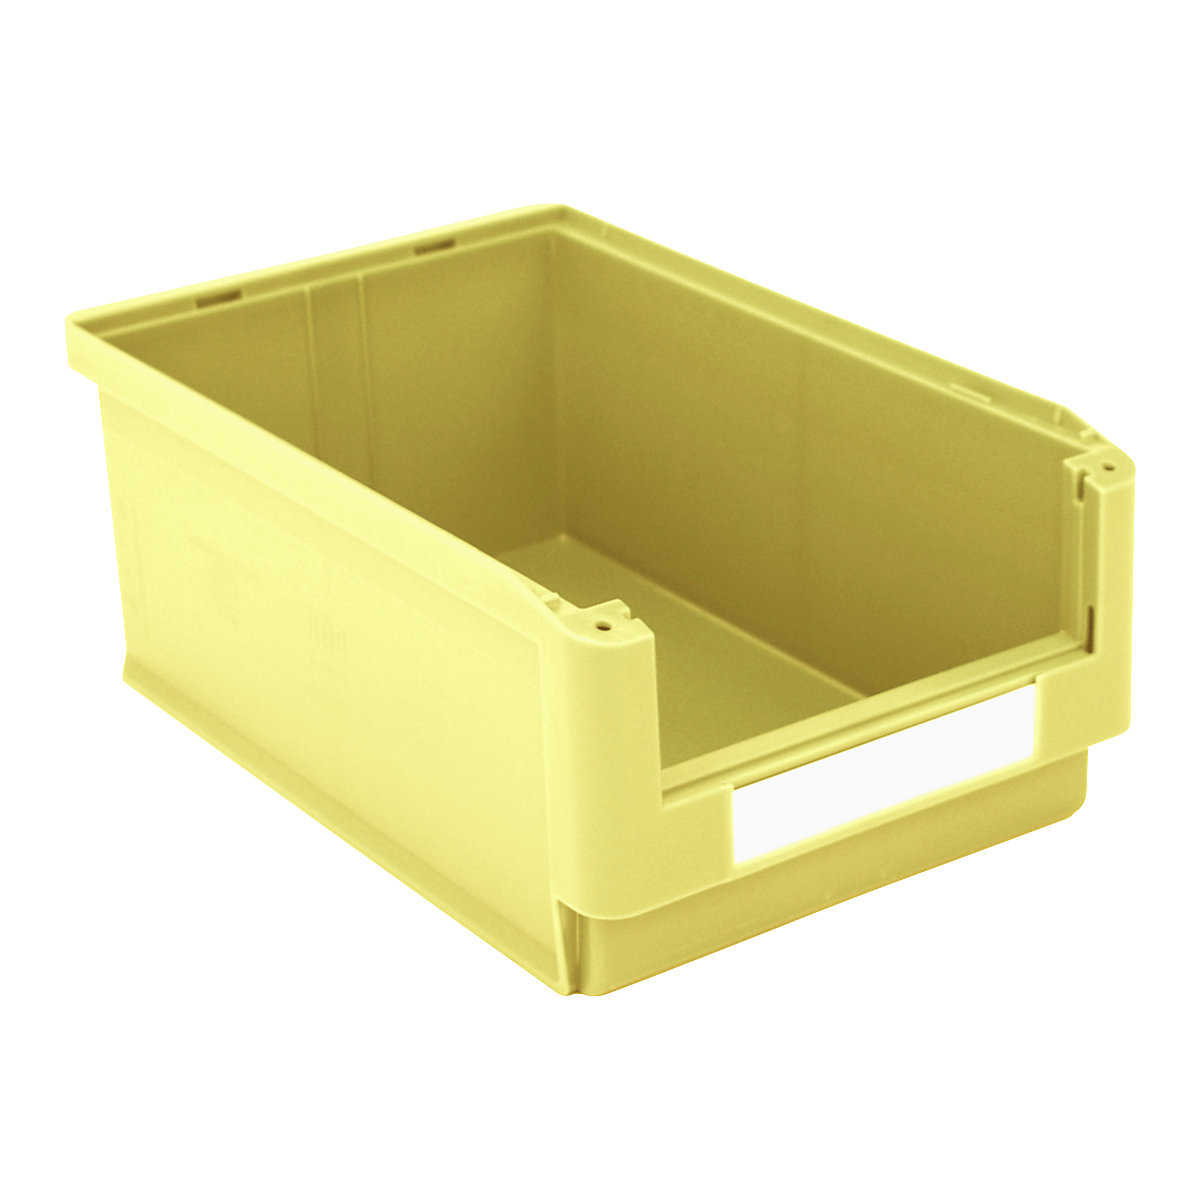 Open fronted storage bin – BITO, LxWxH 500 x 313 x 200 mm, pack of 6, yellow-4